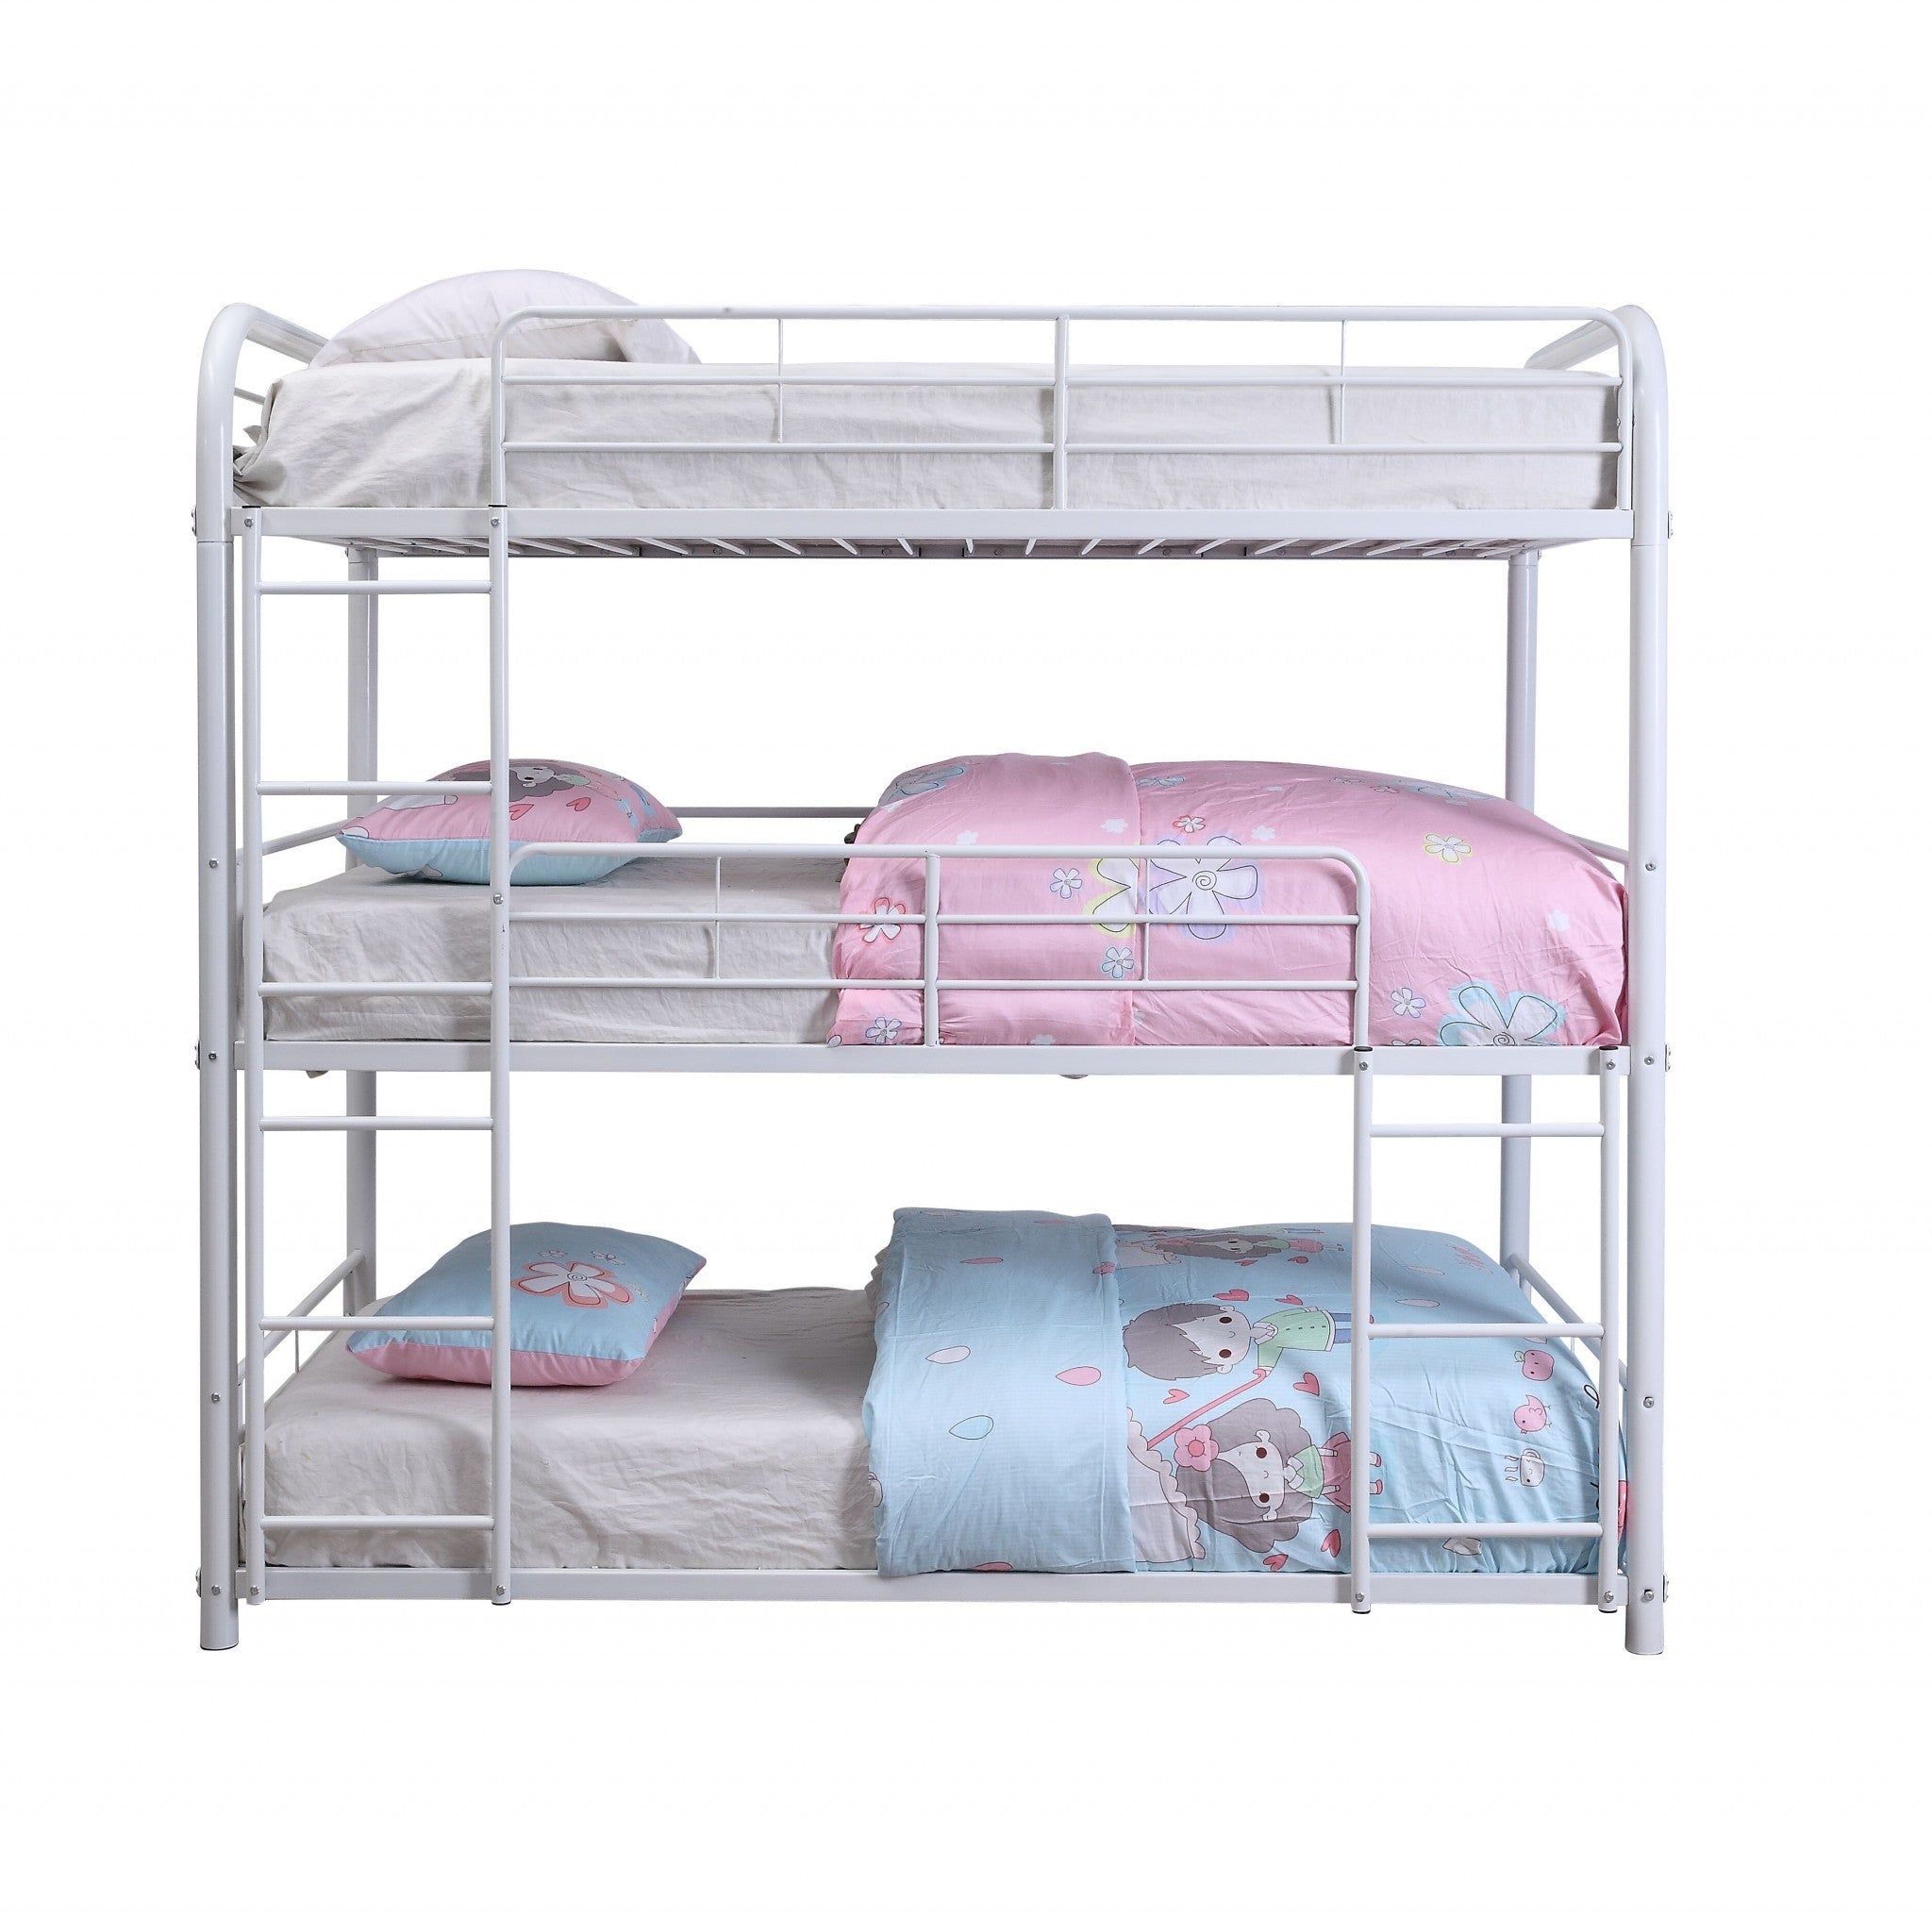 White Metal Triple Bunk Bed - Full 57inches X 79inches X 74inches